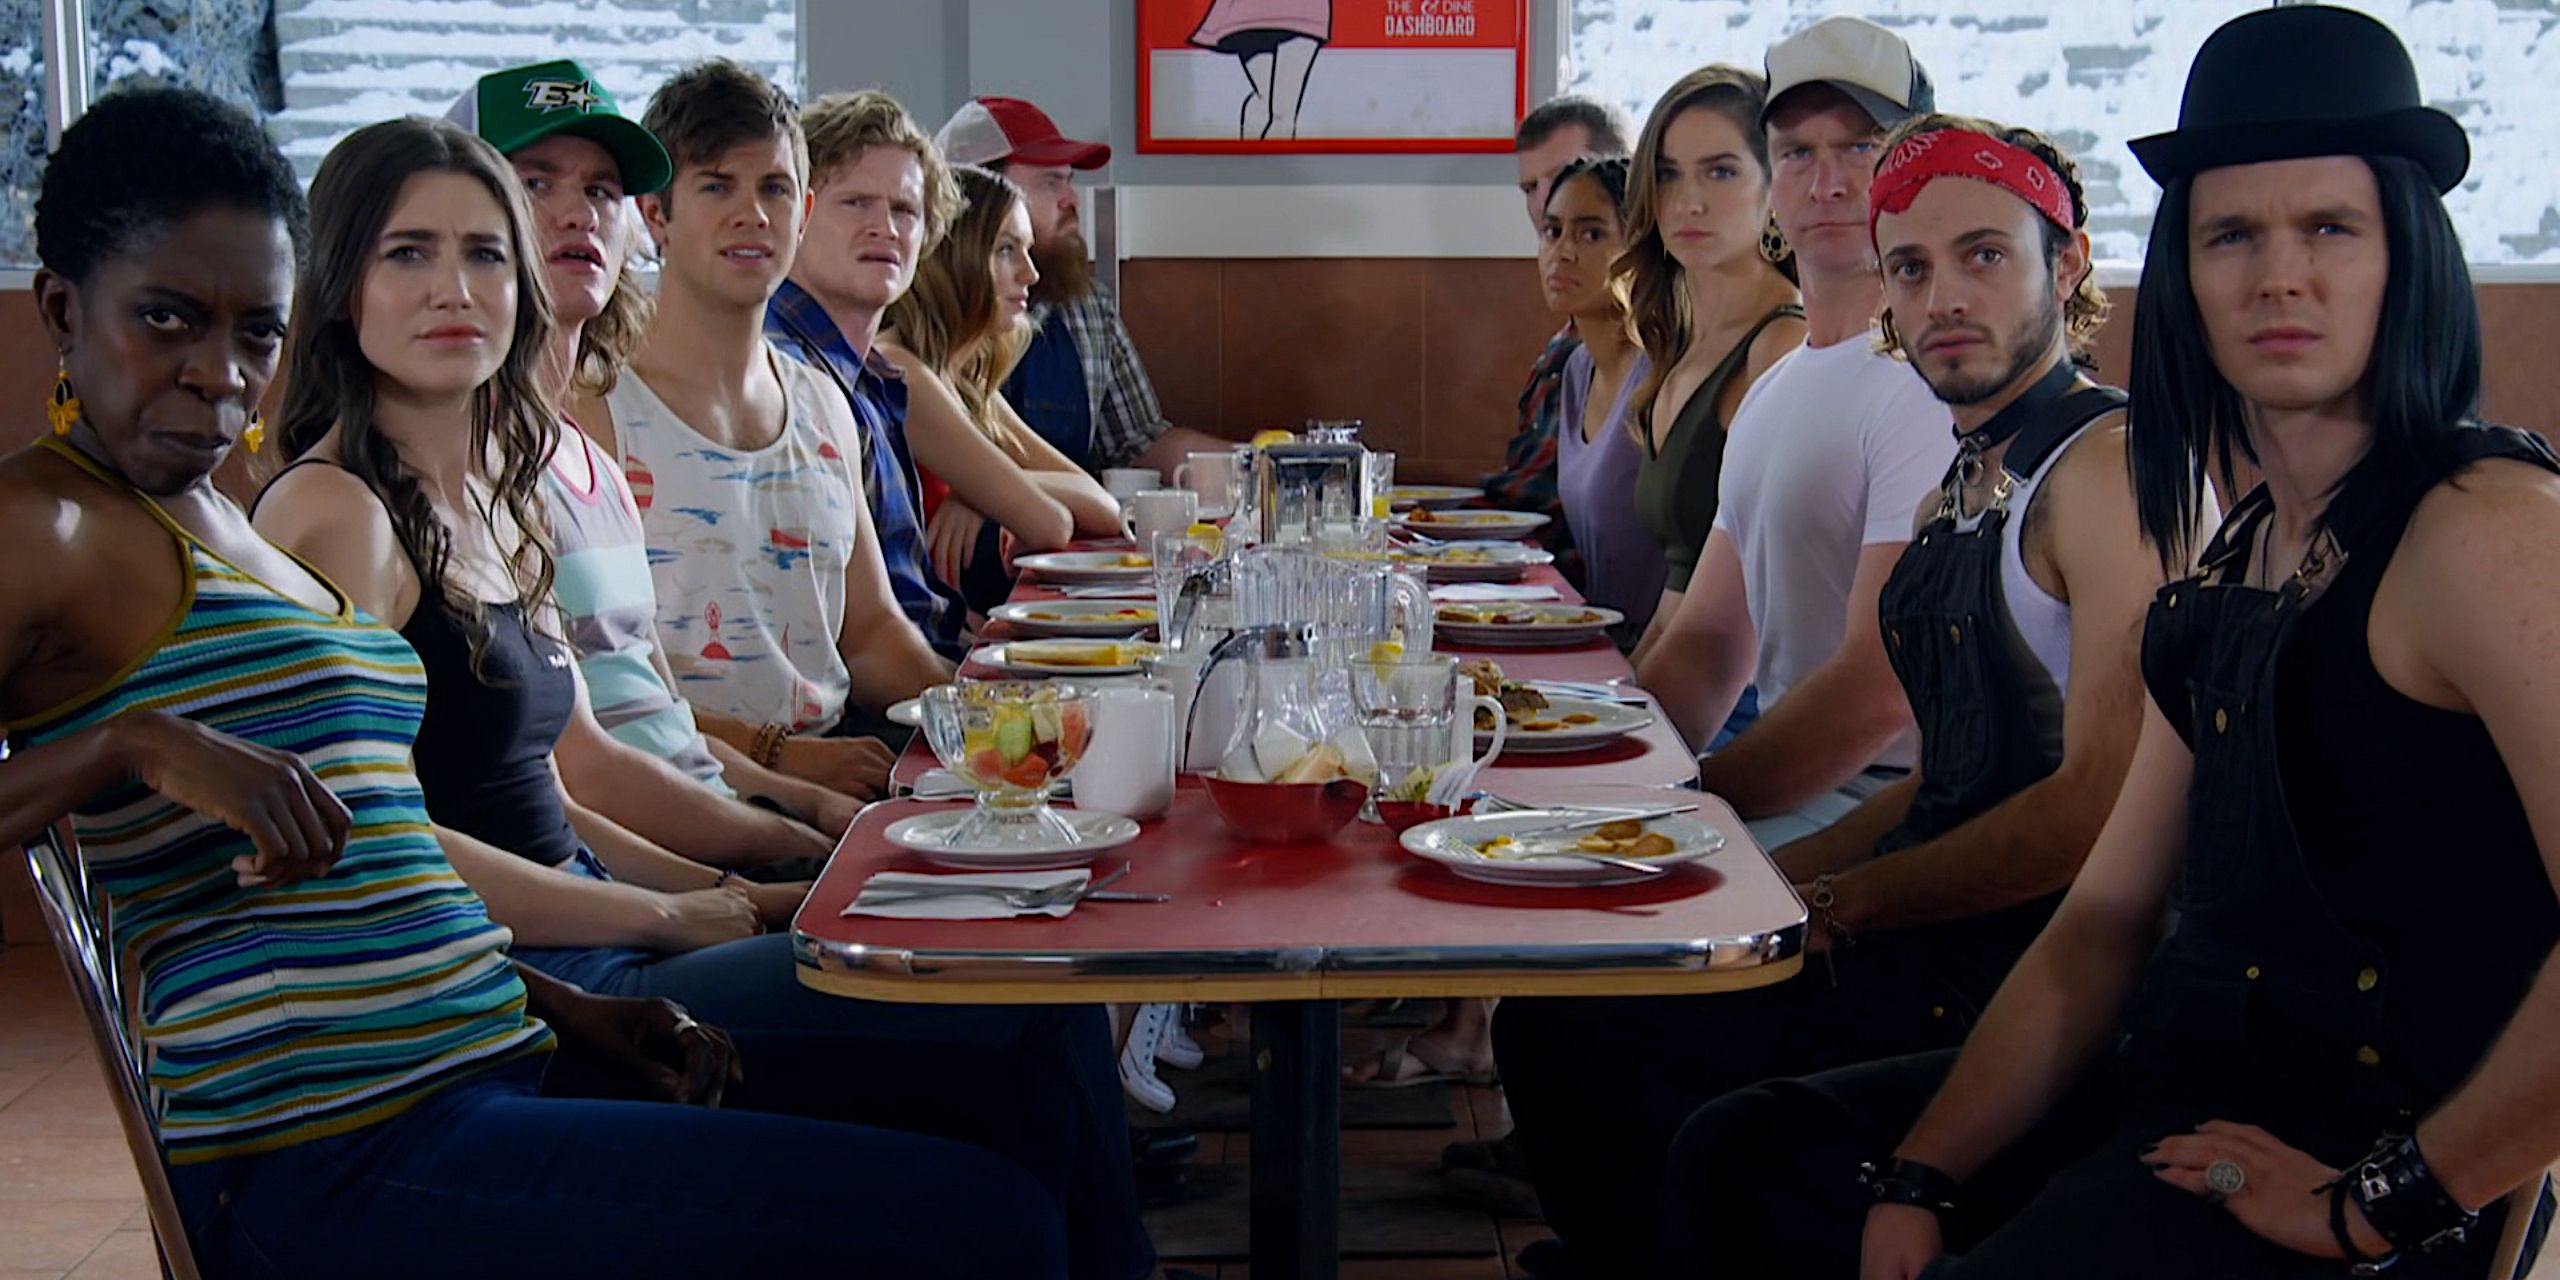 The Letterkenny cast all sitting around a diner table